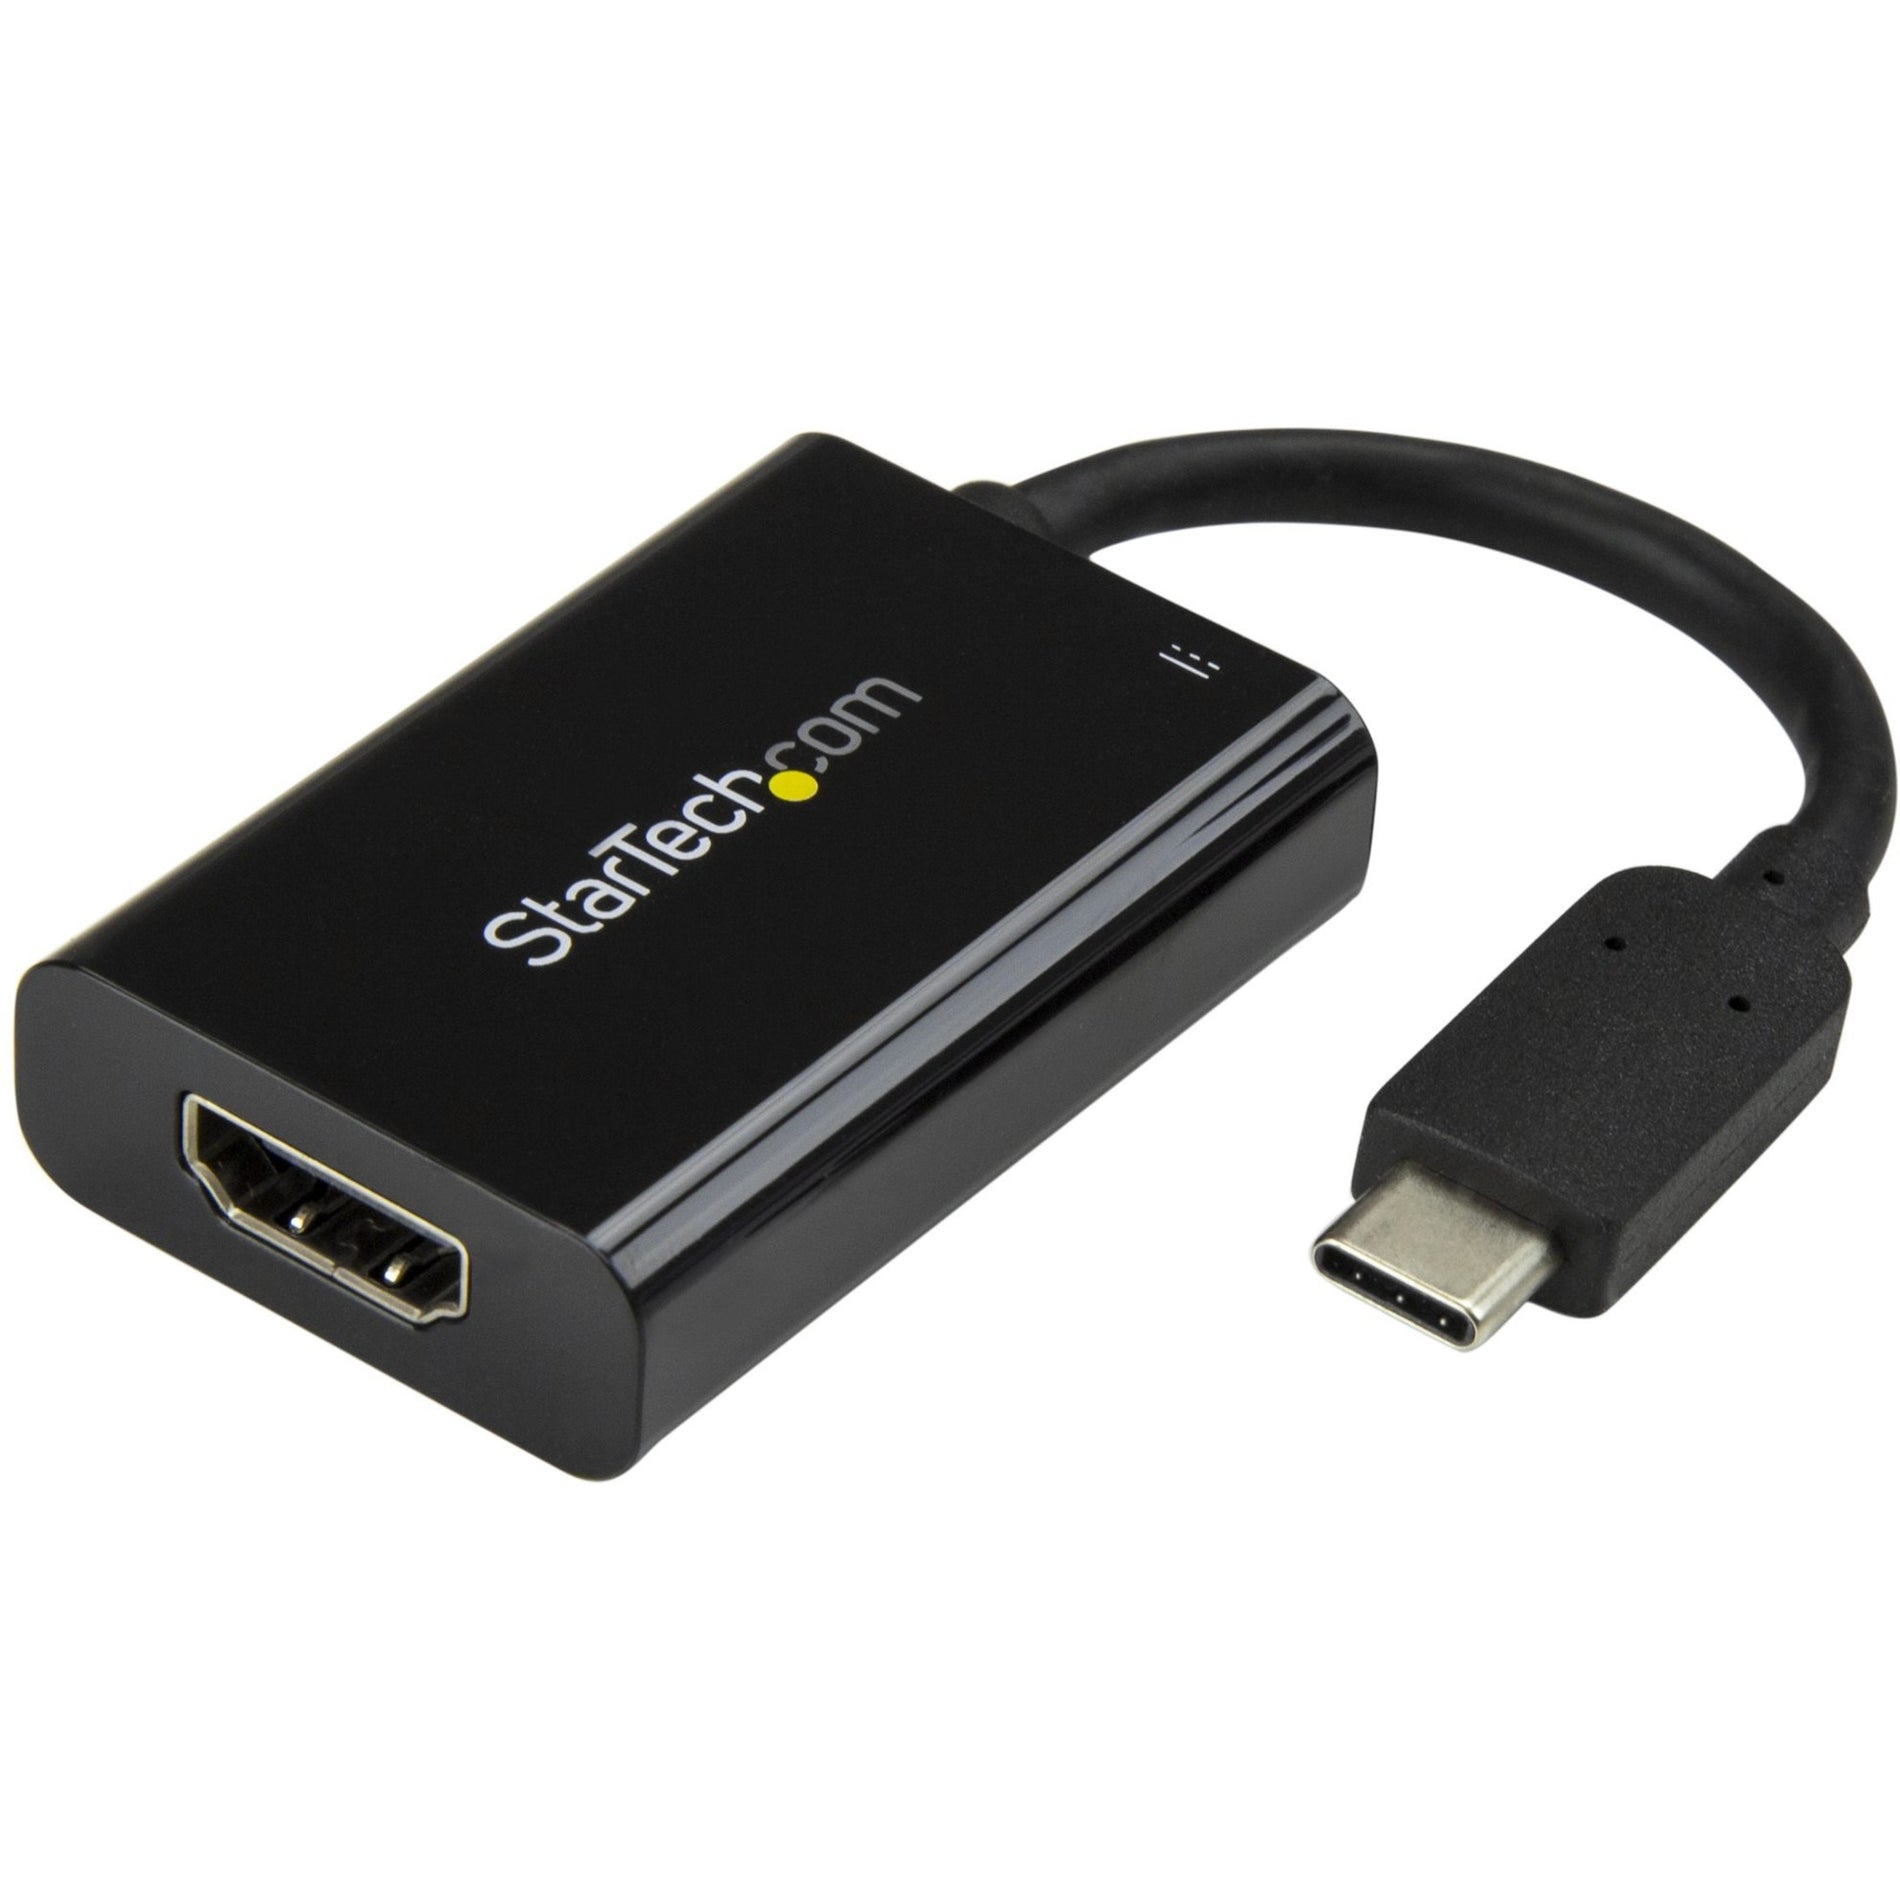 StarTech.com CDP2HDUCP USB-C auf HDMI Video Adapter mit USB Power Delivery - 4K 60Hz Plug-and-Play HDCP 2.2